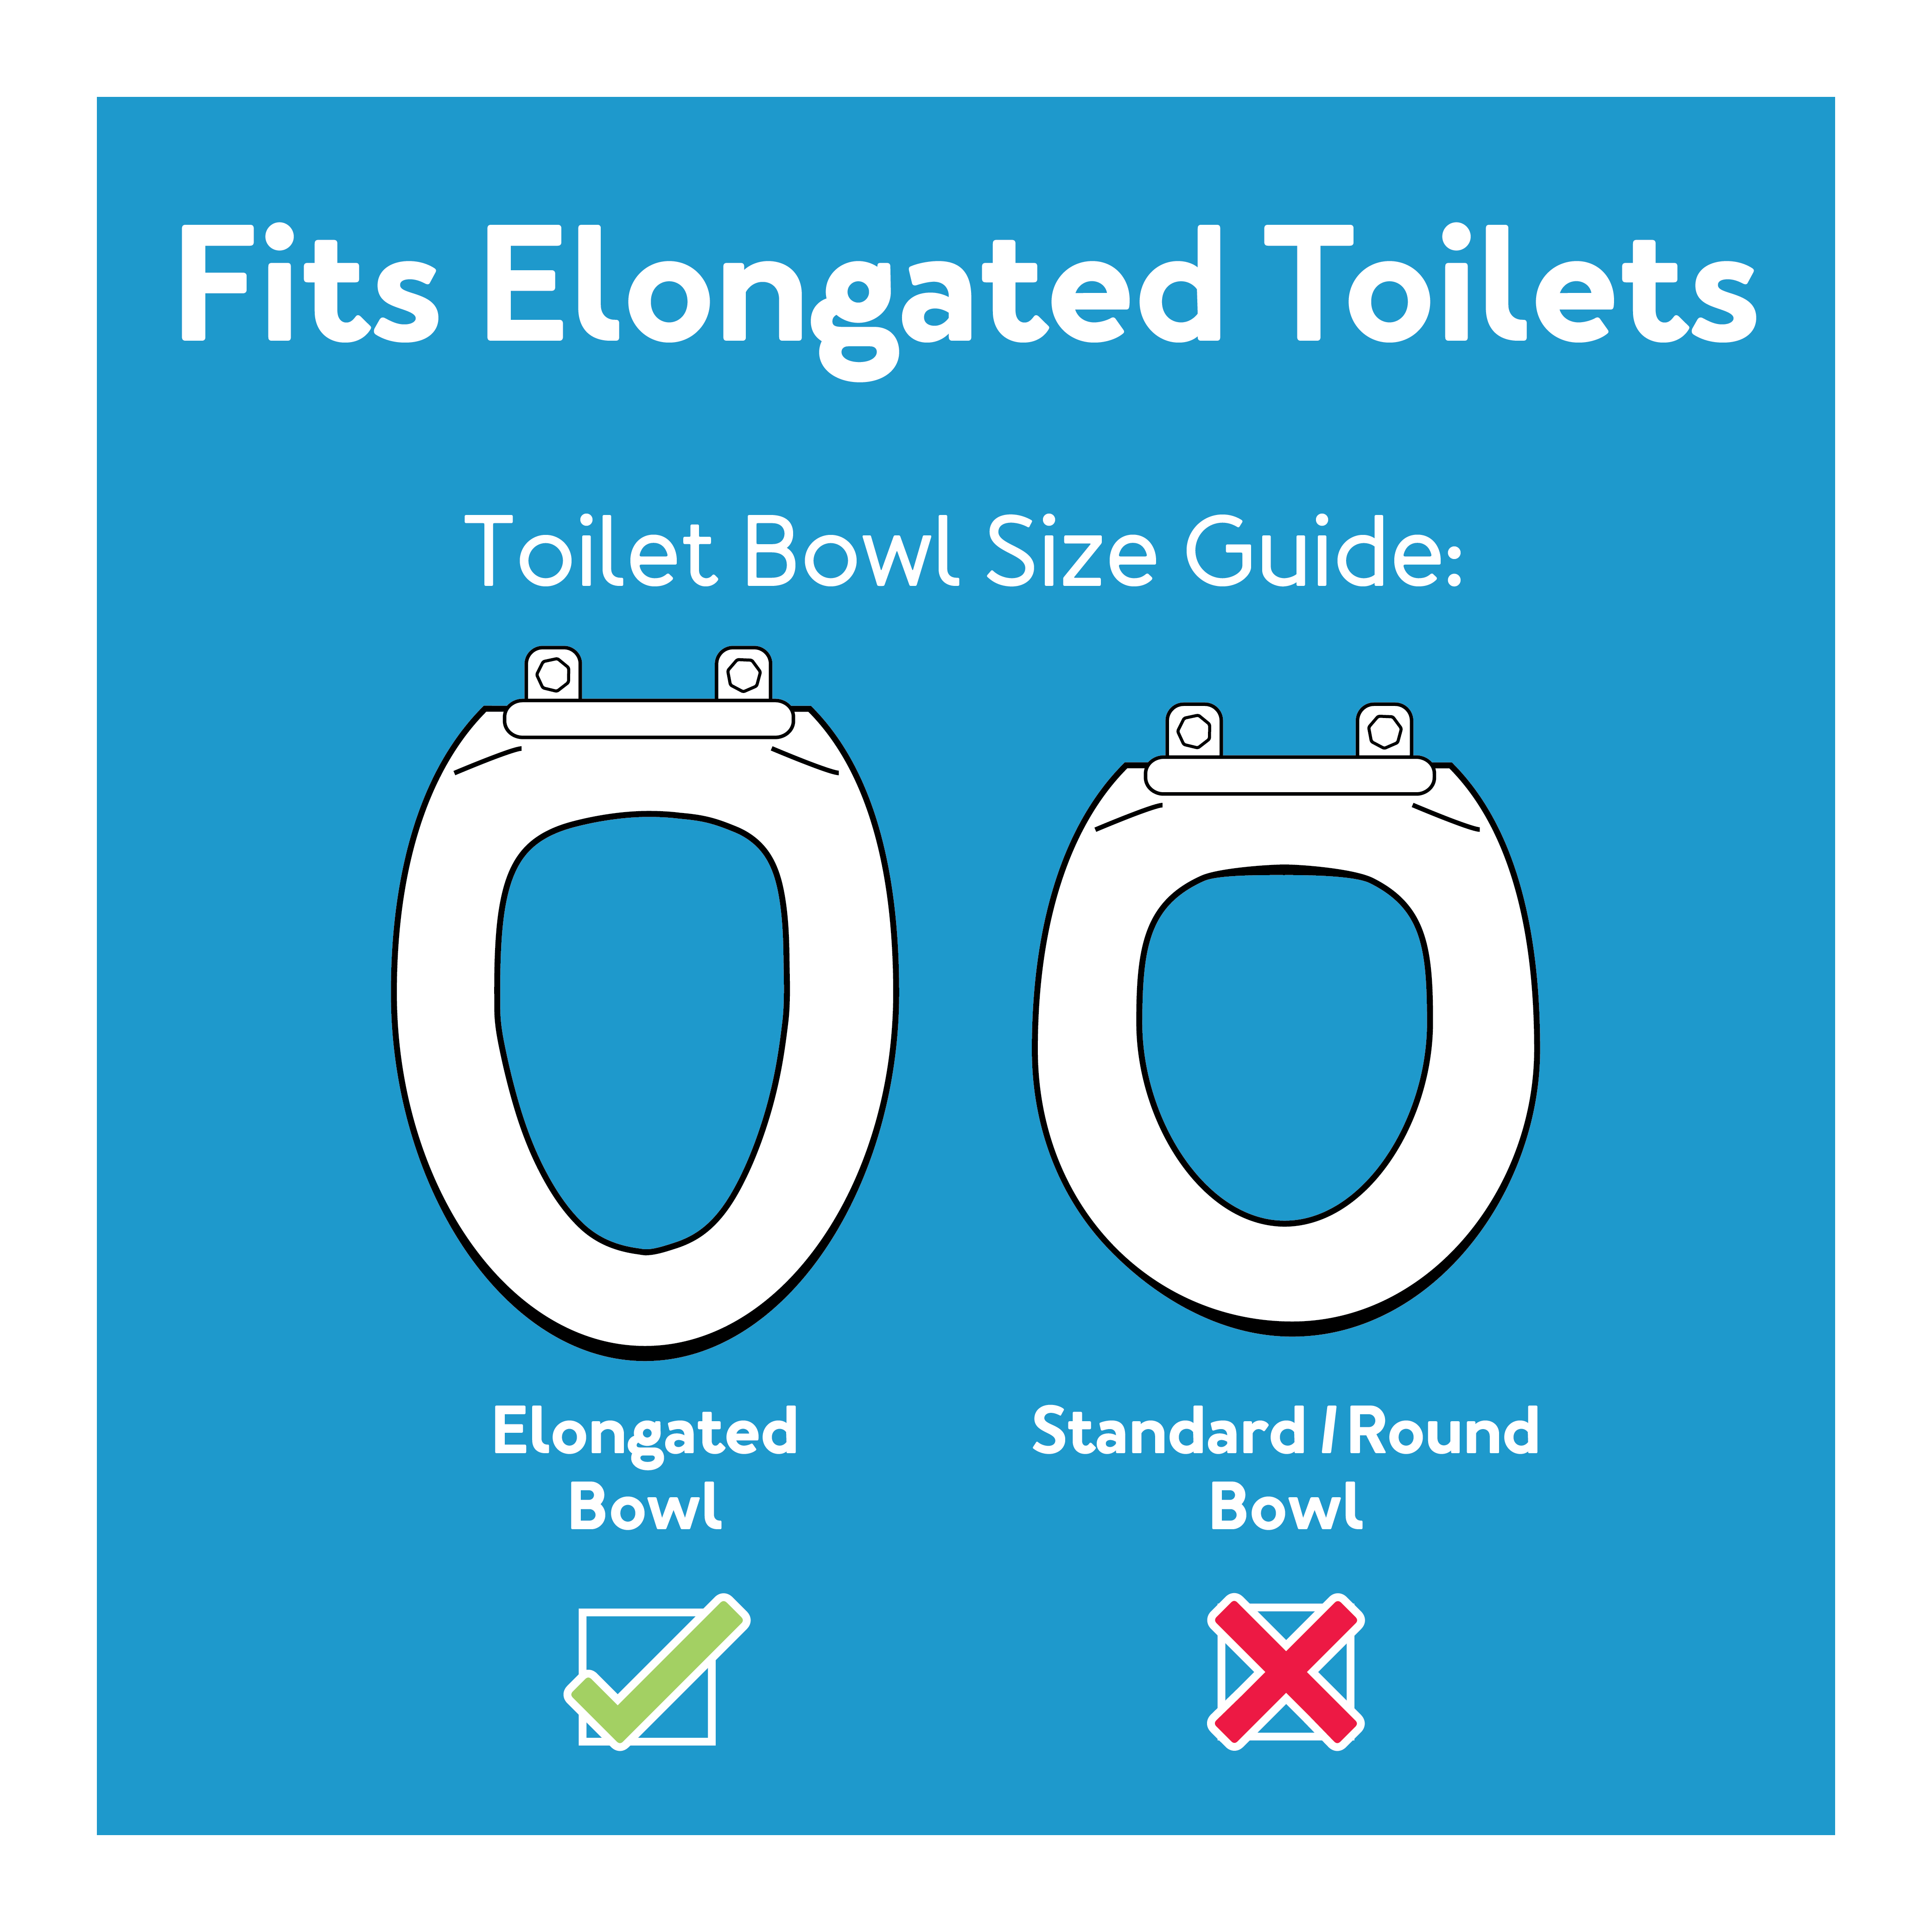 A Guide to Selecting the Best Toilet Seat Riser - EquipMeOT